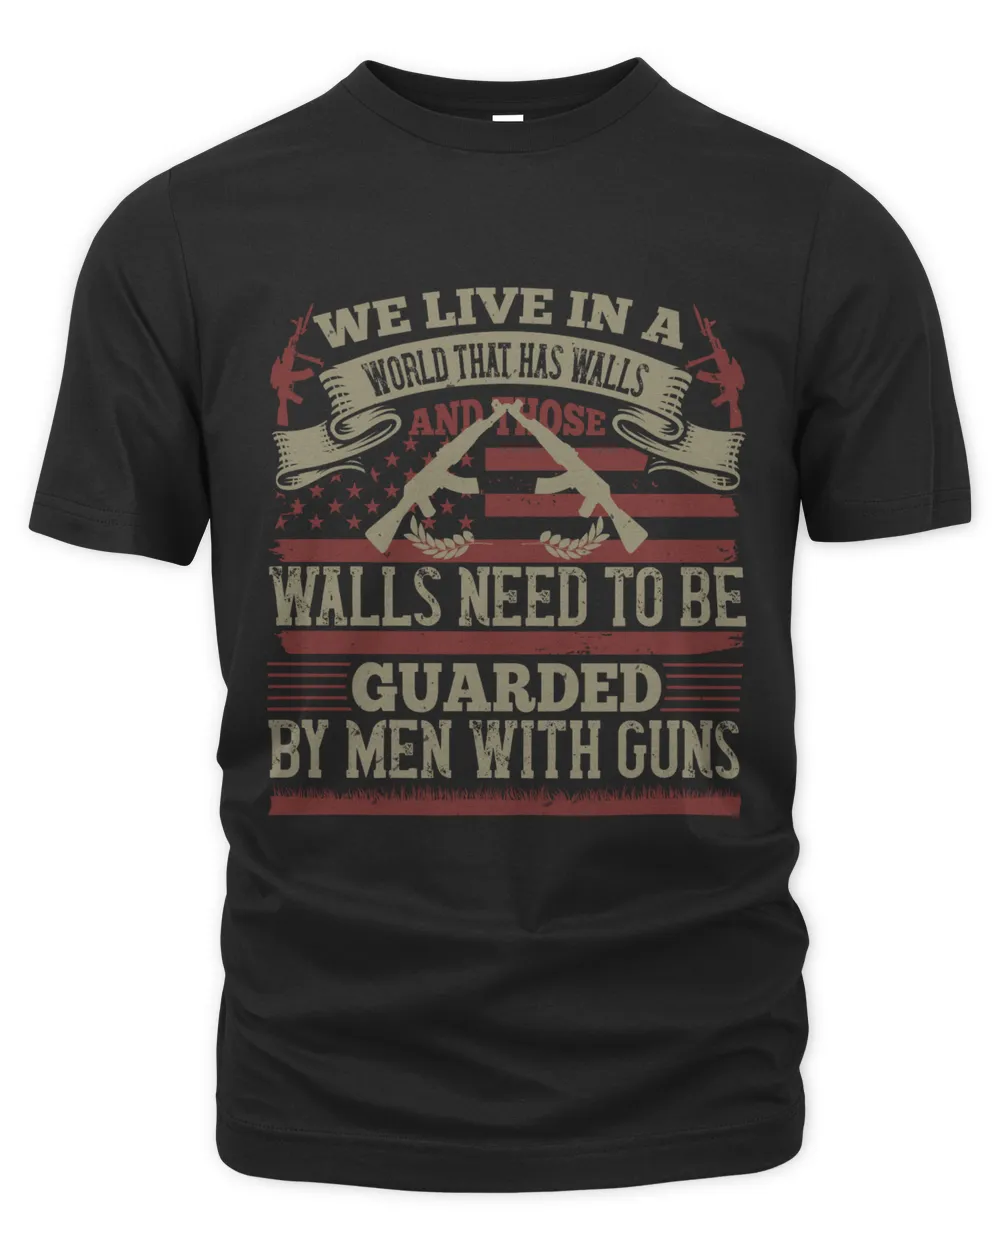 We live in a world that has walls, and those walls need to be guarded by men with guns-01